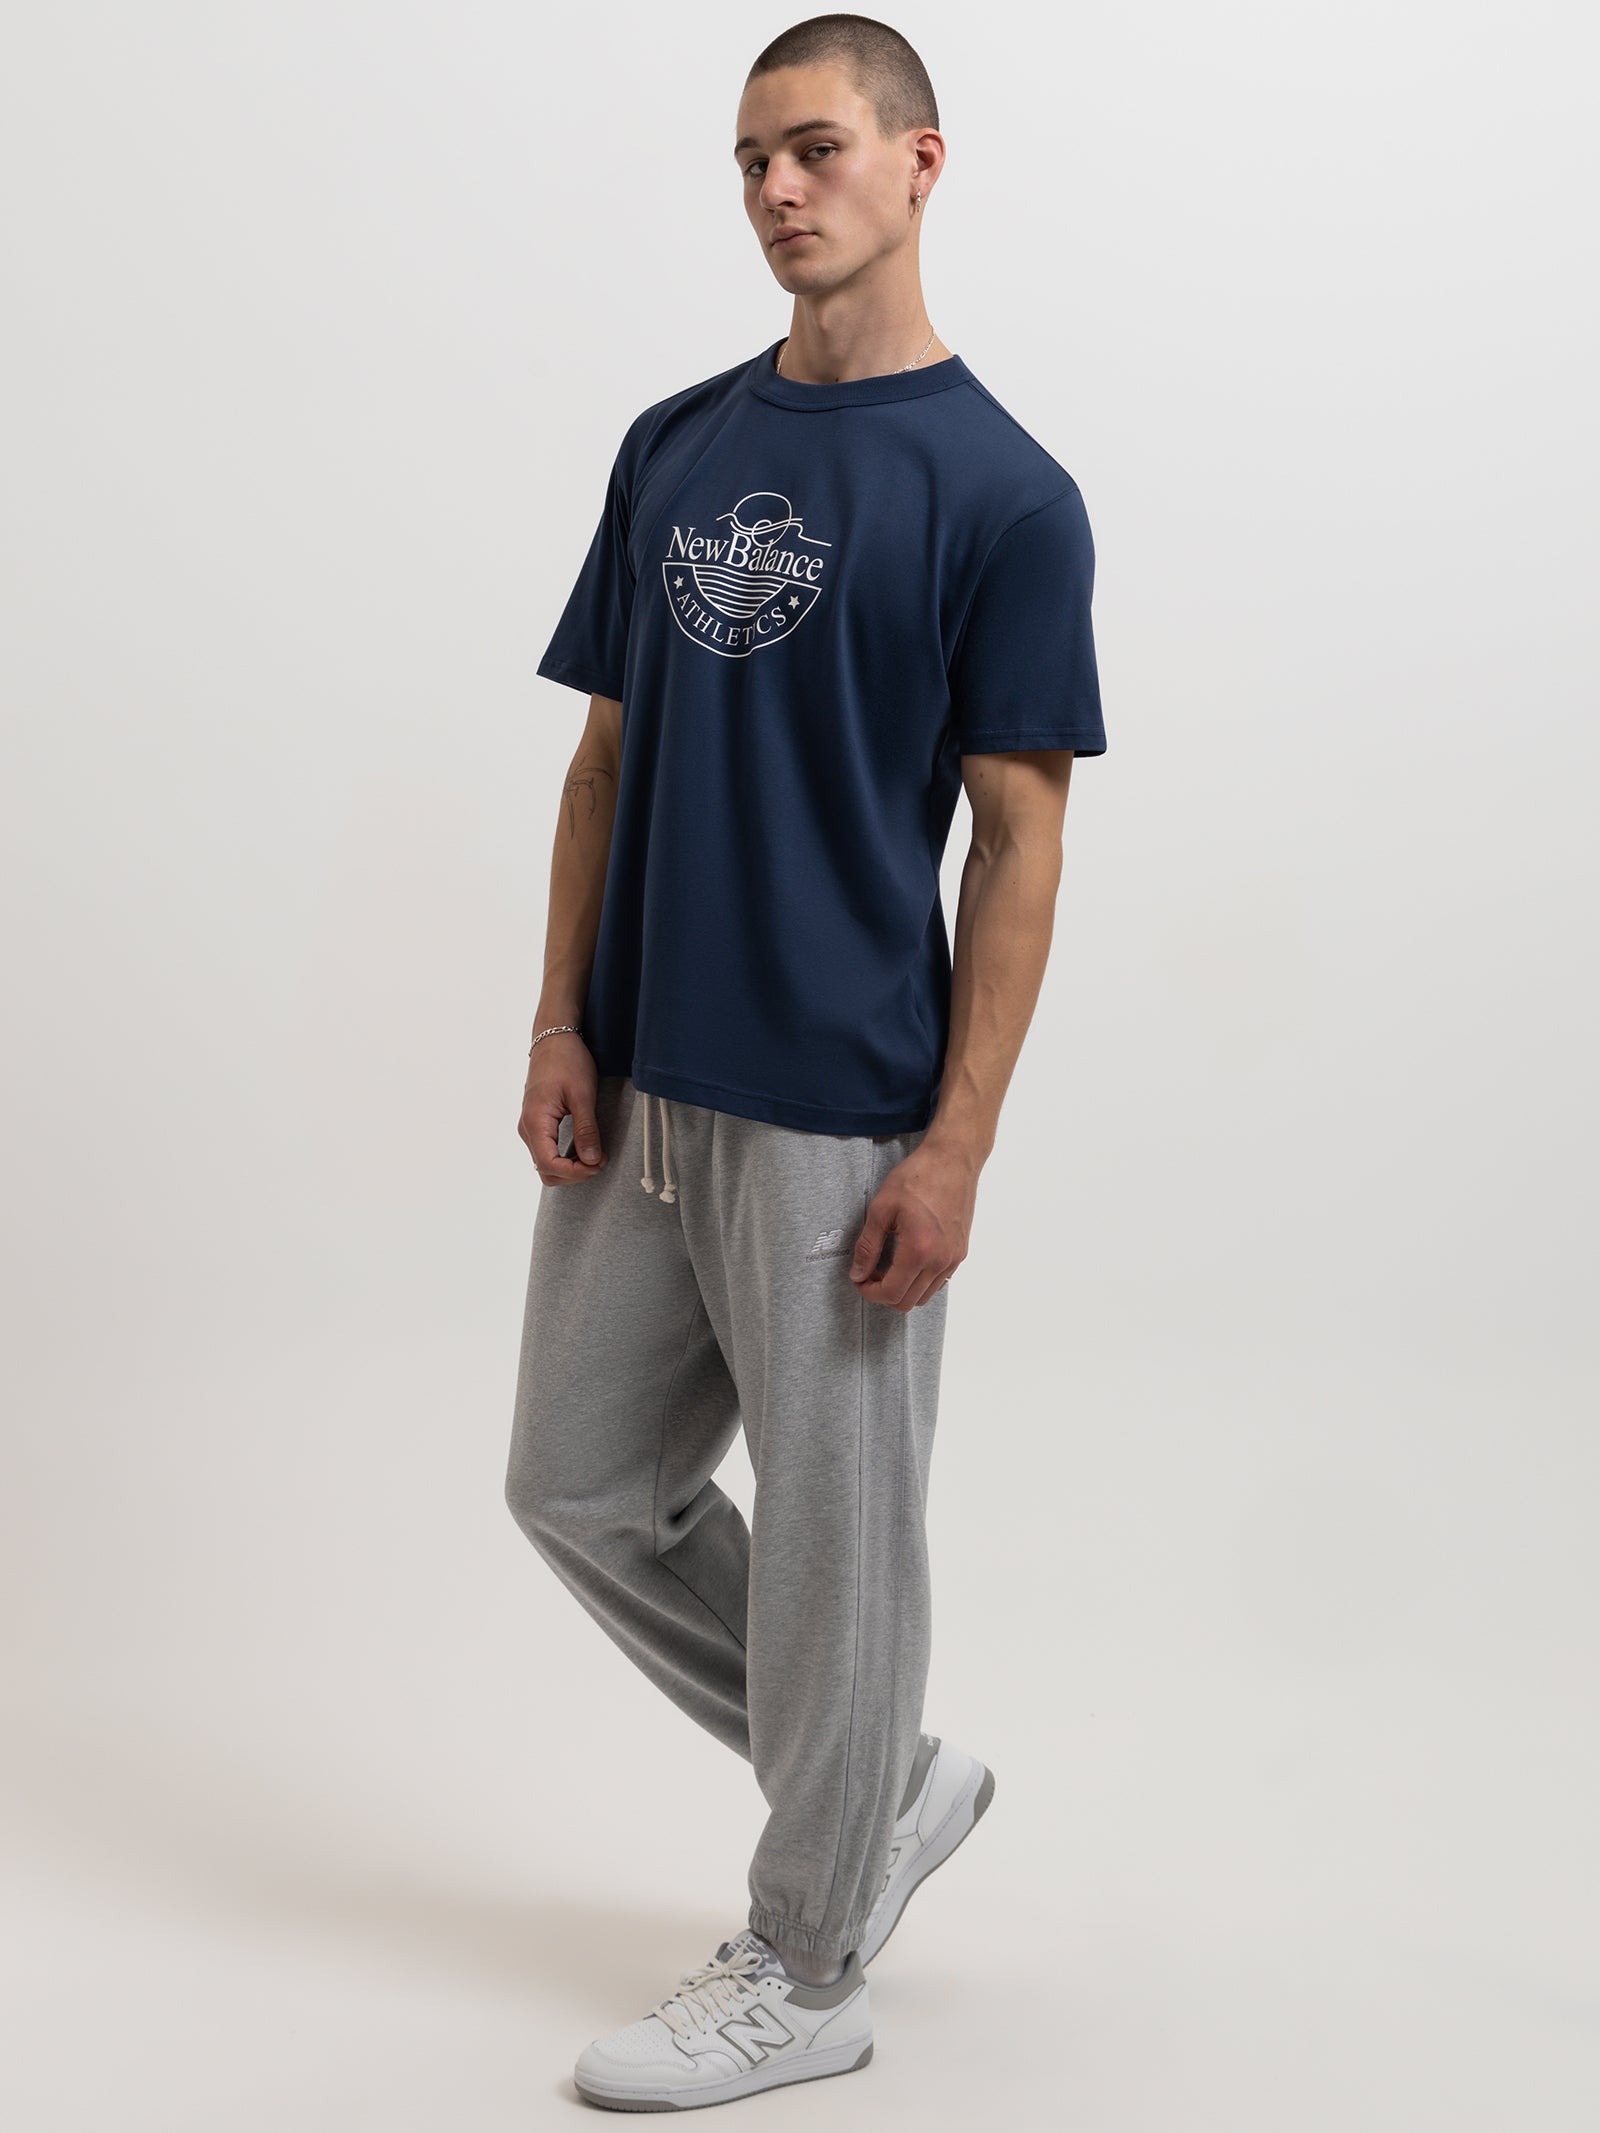 Athletic Remastered French Terry Sweatpants in Athletic Grey